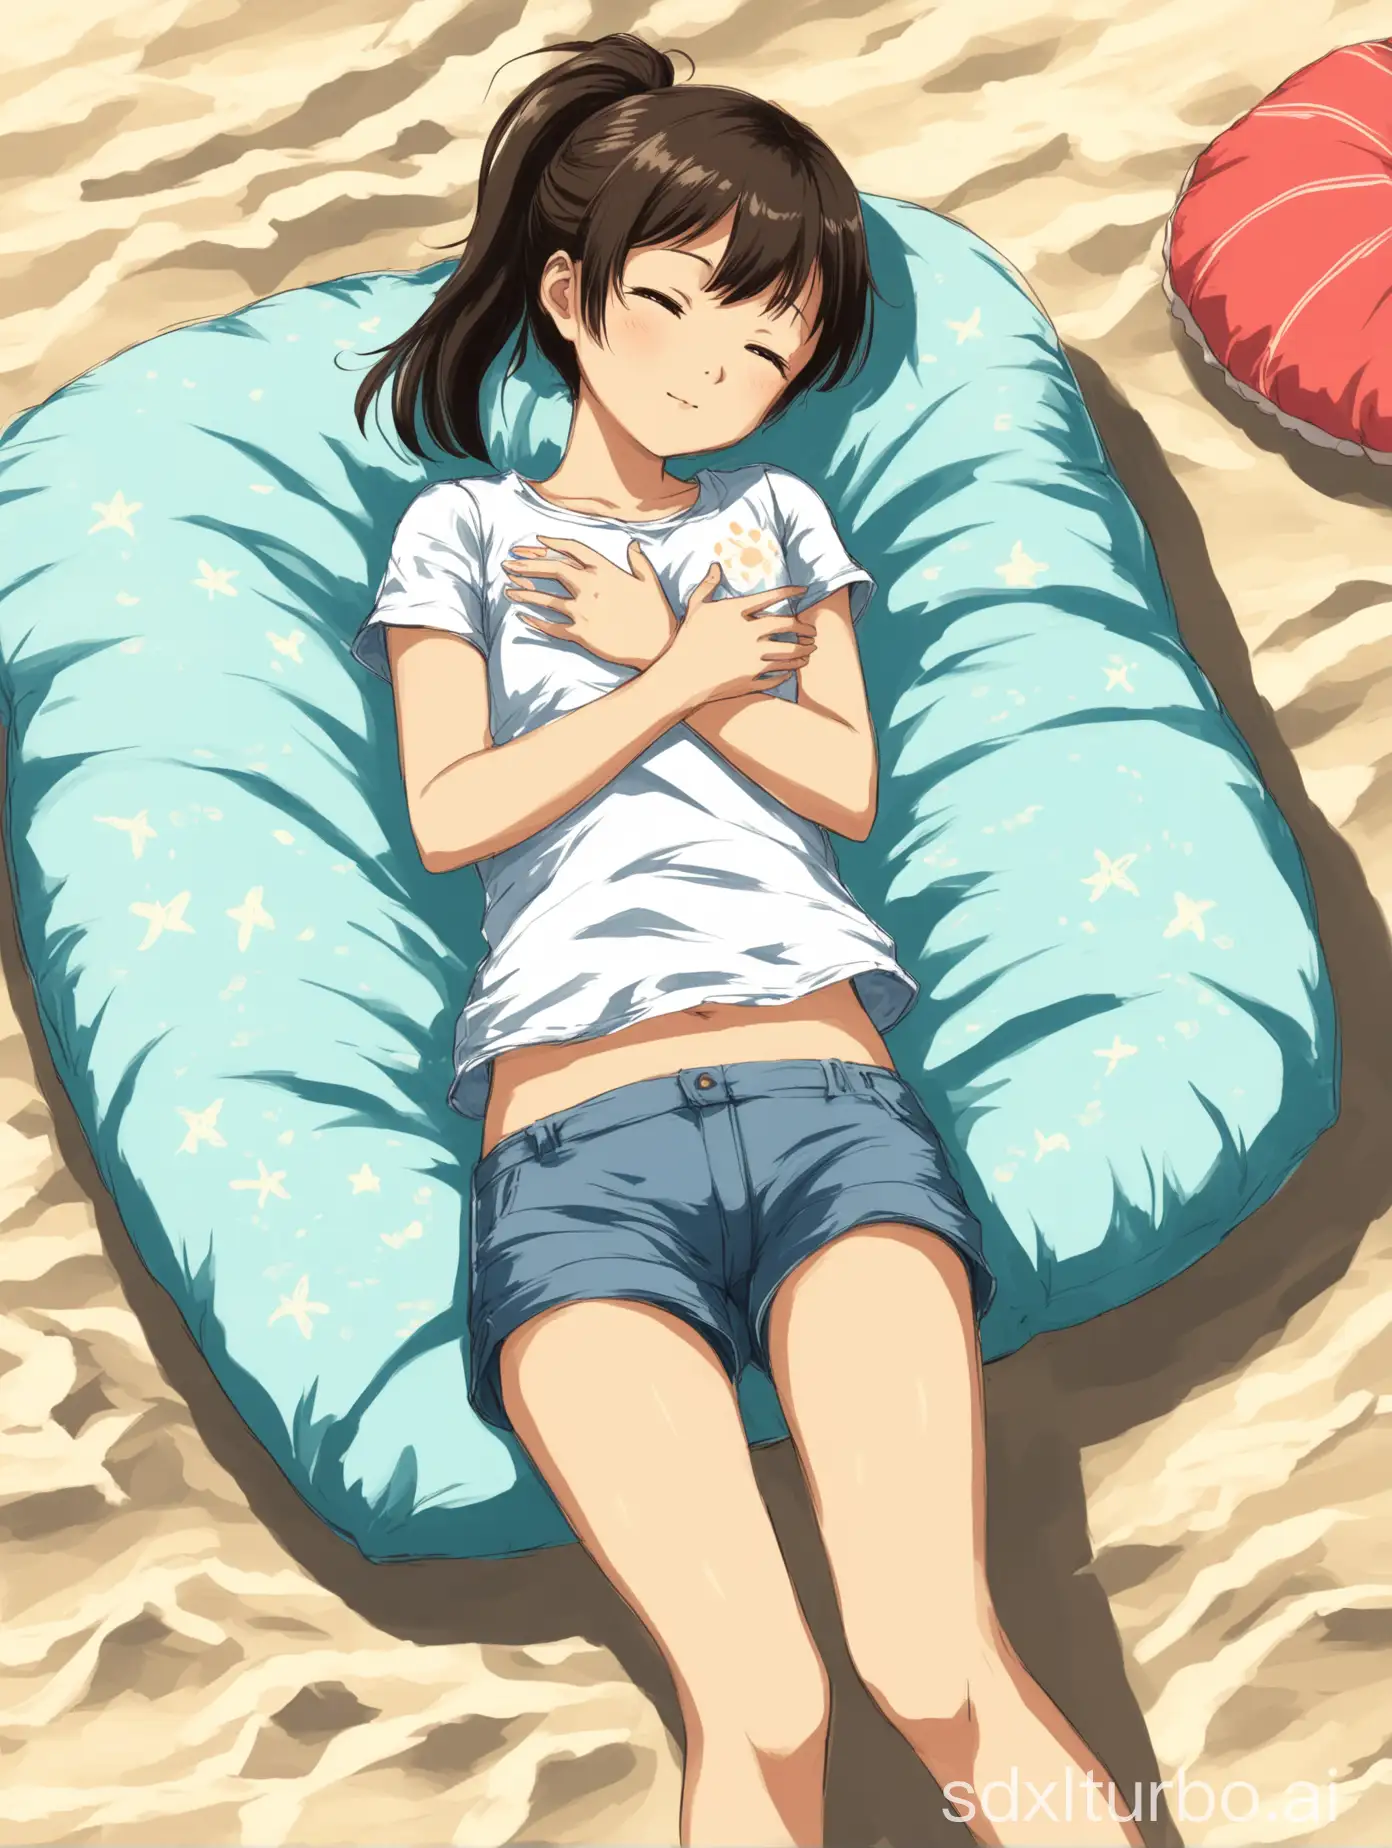 Carefree-Asian-Girl-Relaxing-on-Beach-in-Anime-Style